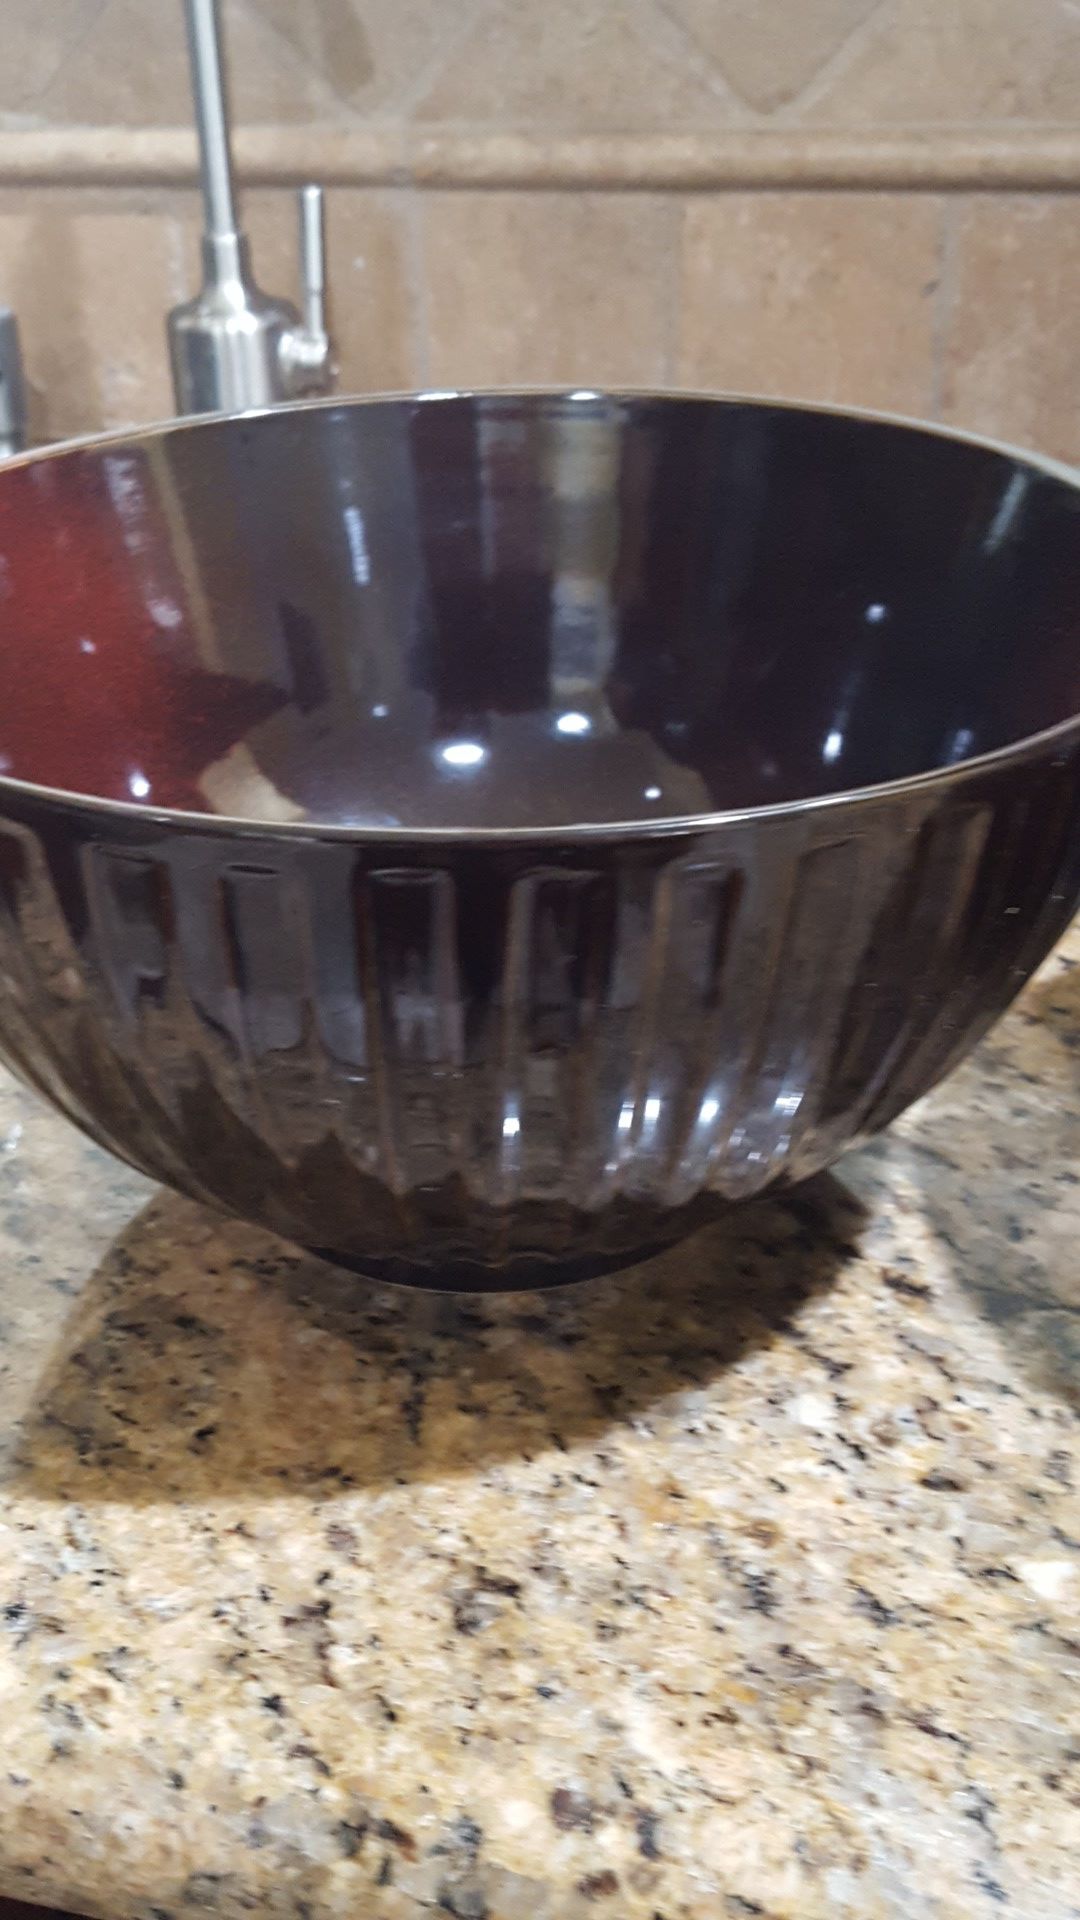 Mixing bowls,Ceramic, small to large. Beautiful chocolate color. Amazing for serving and mixing.